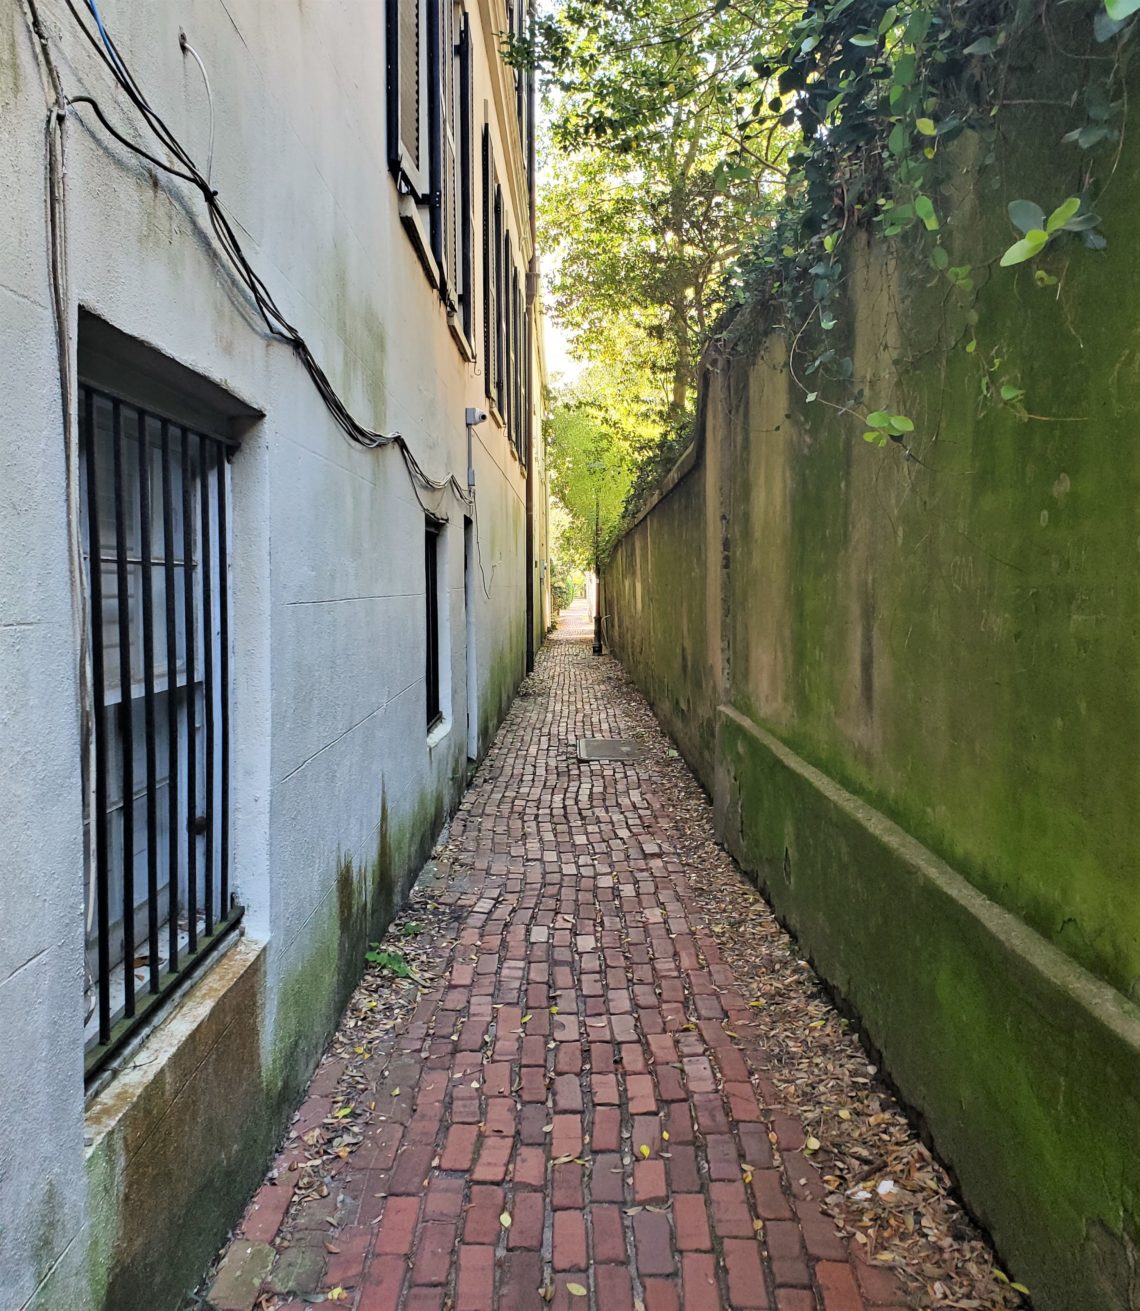 Stolls Alley, which connects East Bay to Church Street, is one of my favorite cut-thru's in Charleston. 